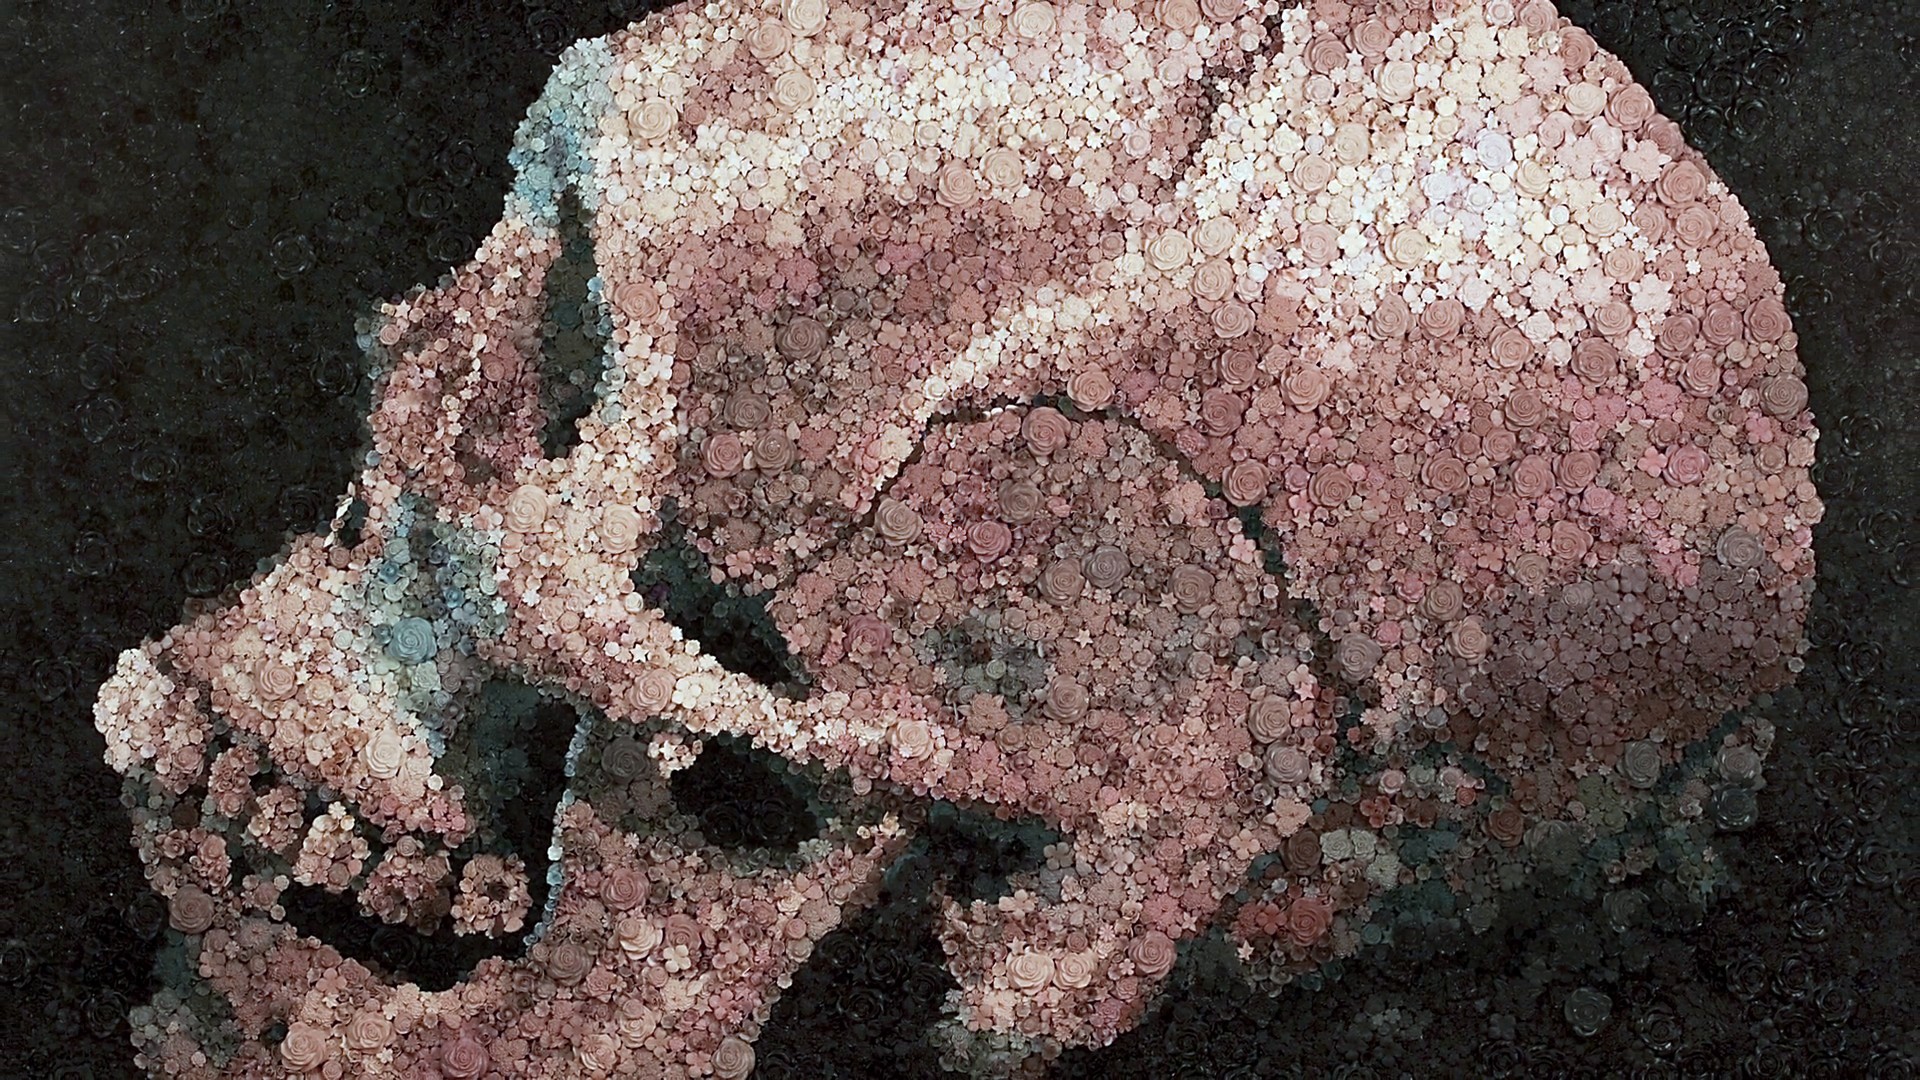 Wallpaper Skull made with flowers, fantasy